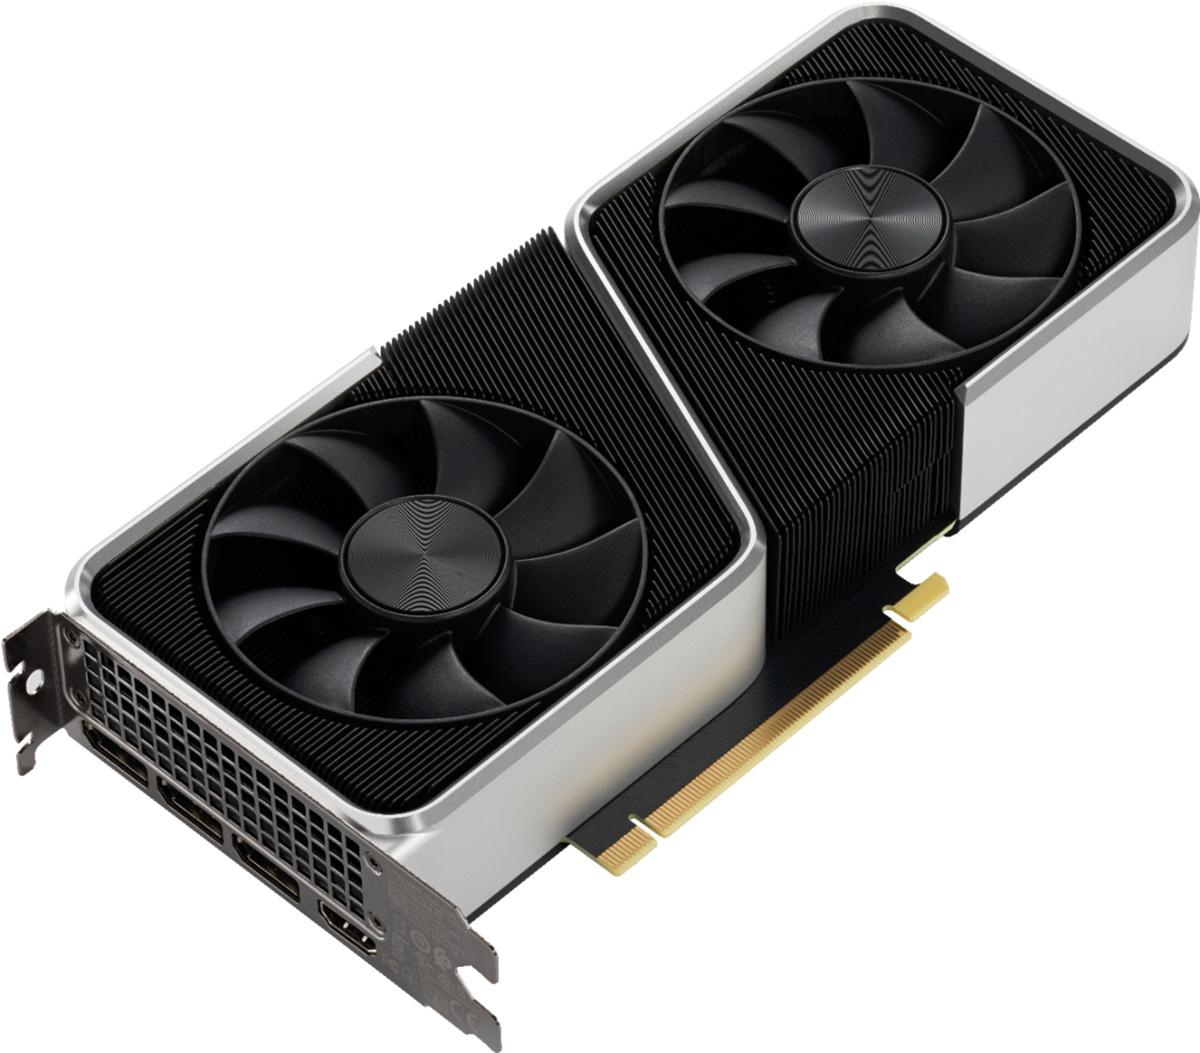 Nvidia GeForce RTX 3060 Ti 8GB GDDR6 PCIe 4.0 Graphics Card for $399.99 Shipped